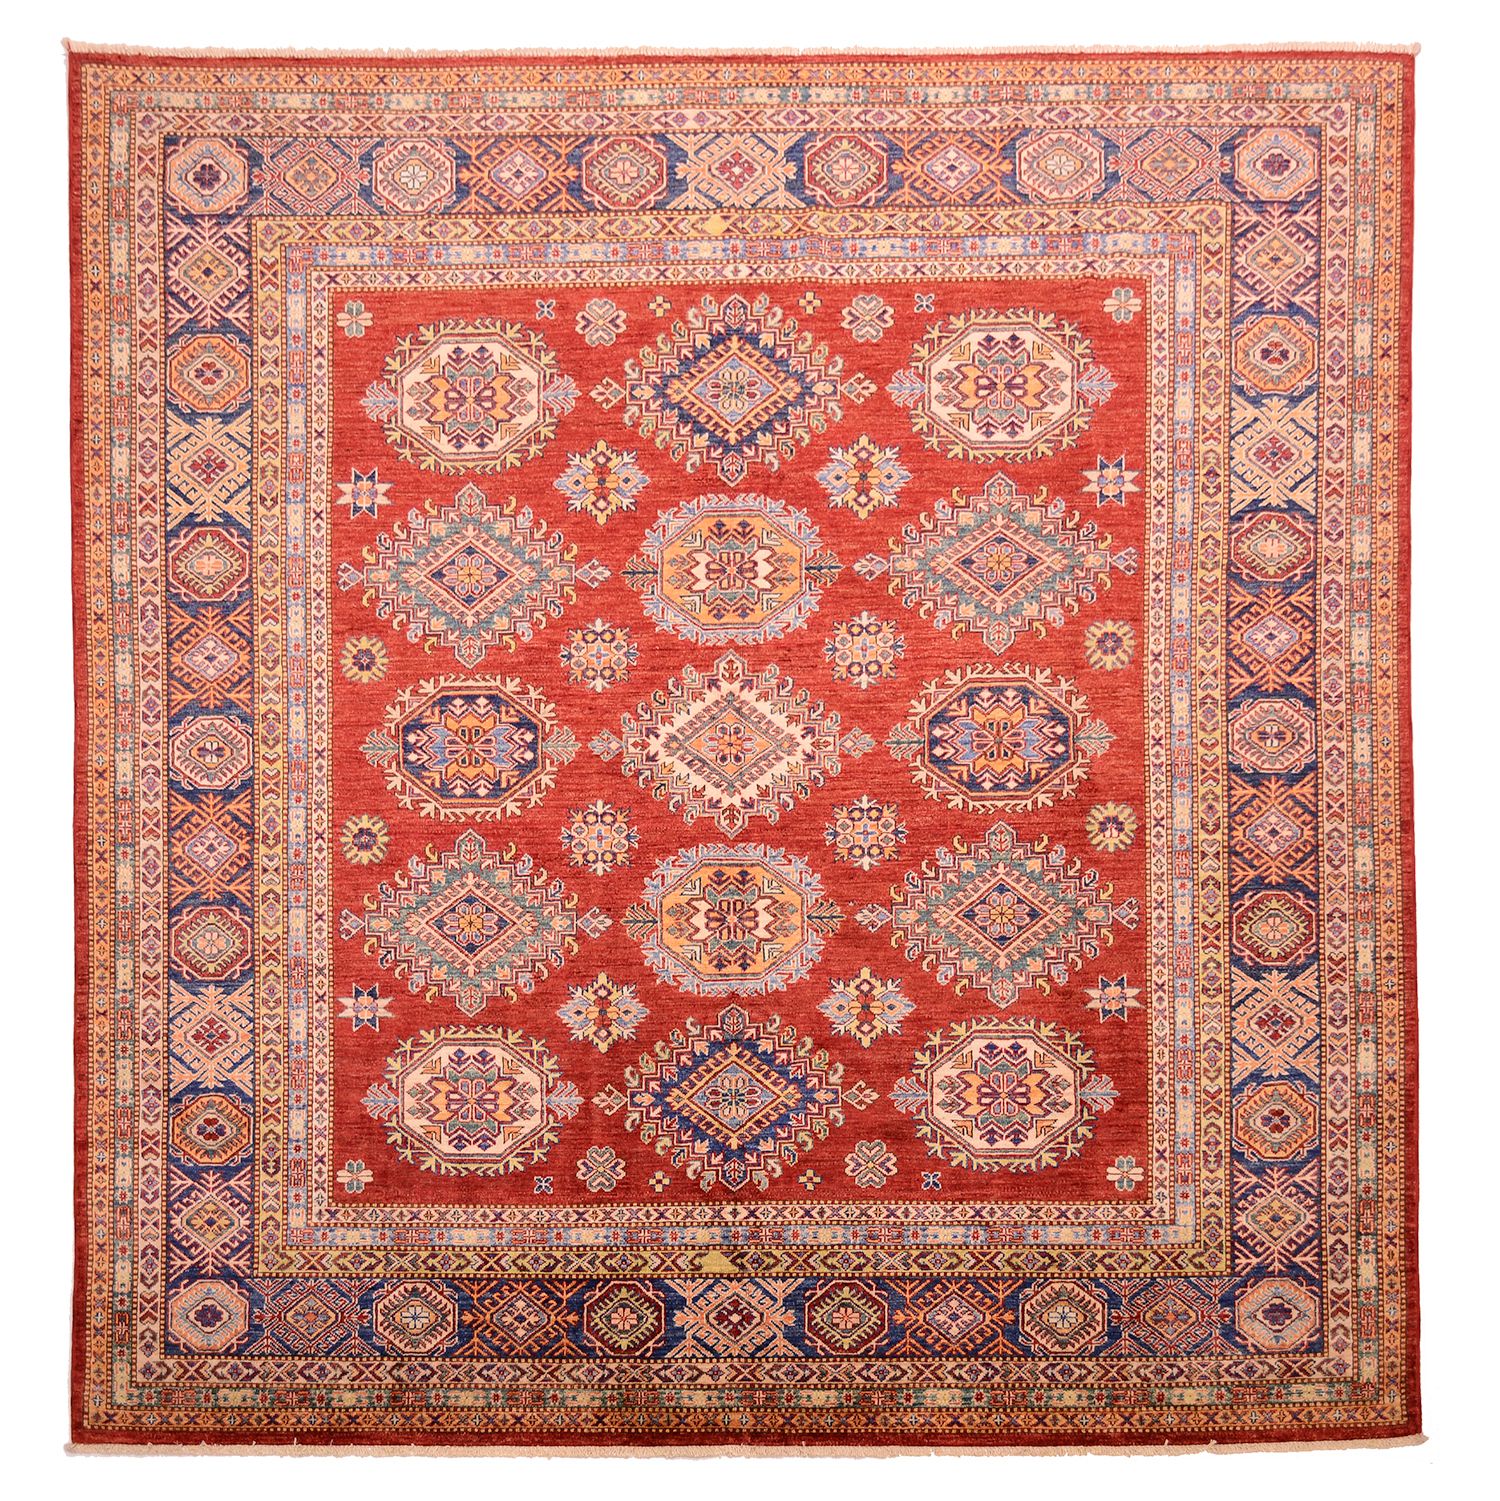 Fine Afghan Red Kazak Square Rug 2.48X (View 13 of 15)